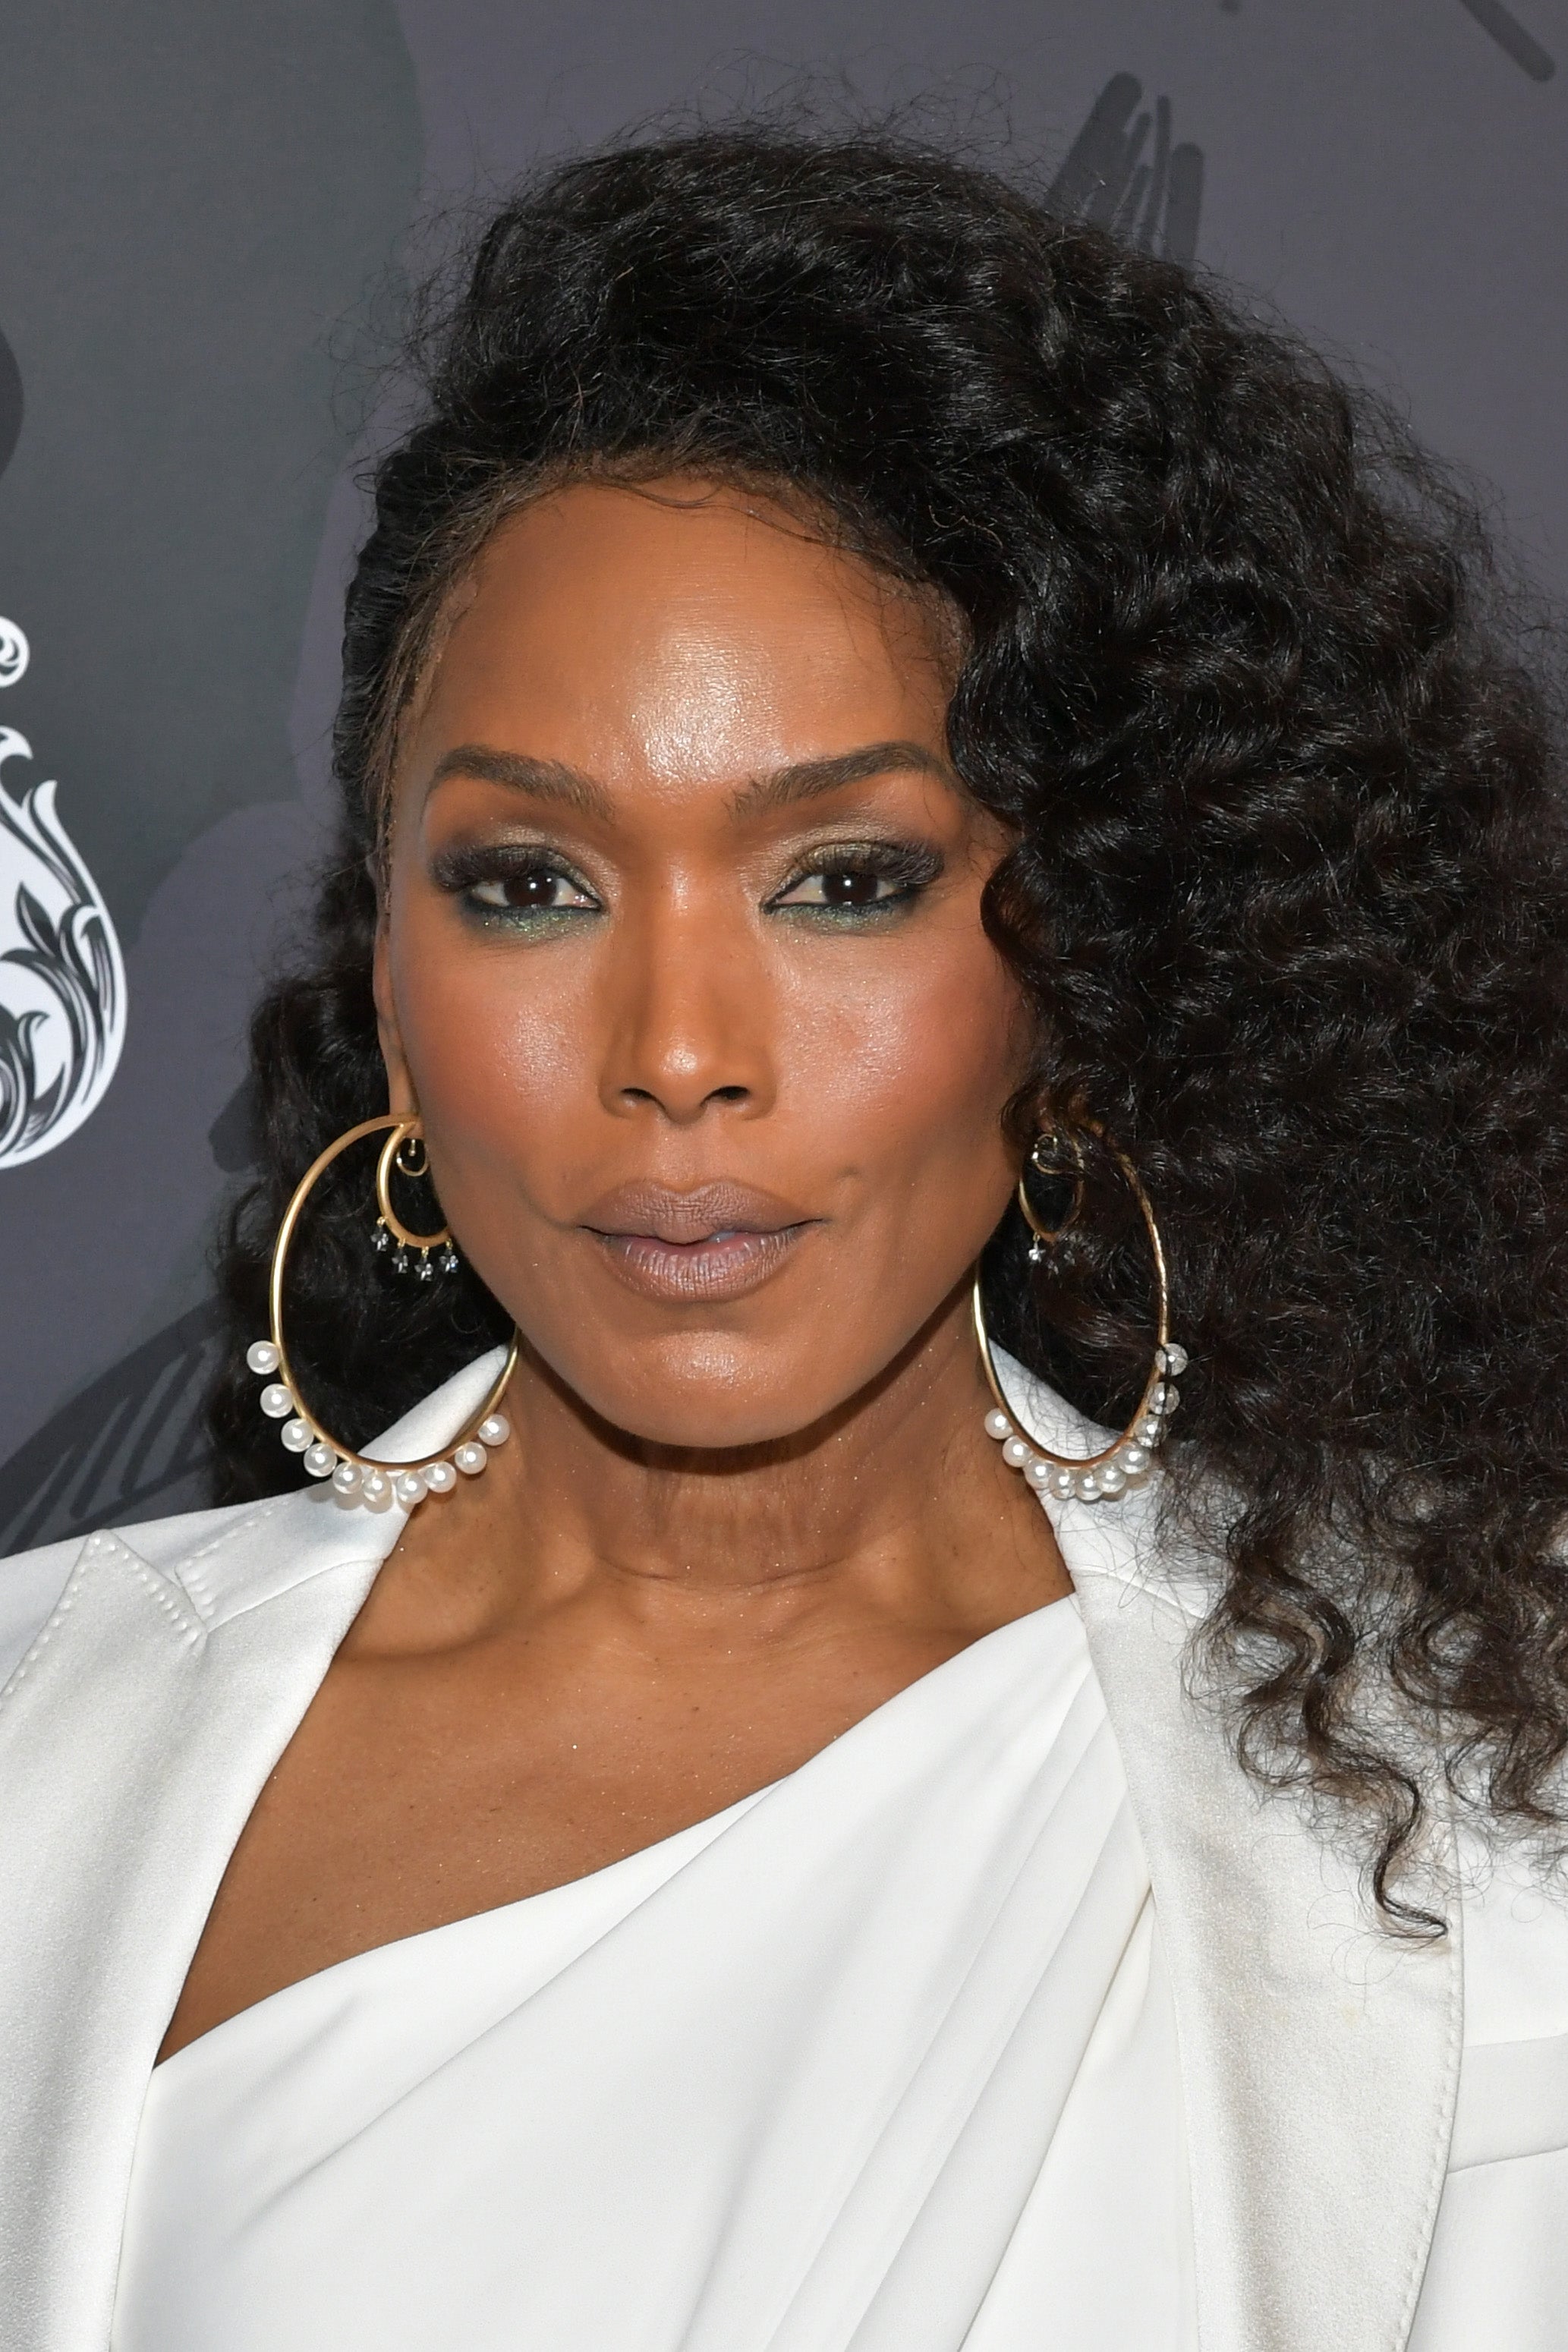 13 Times Angela Bassett Reminded Us Why She's Muva To This Beauty Game